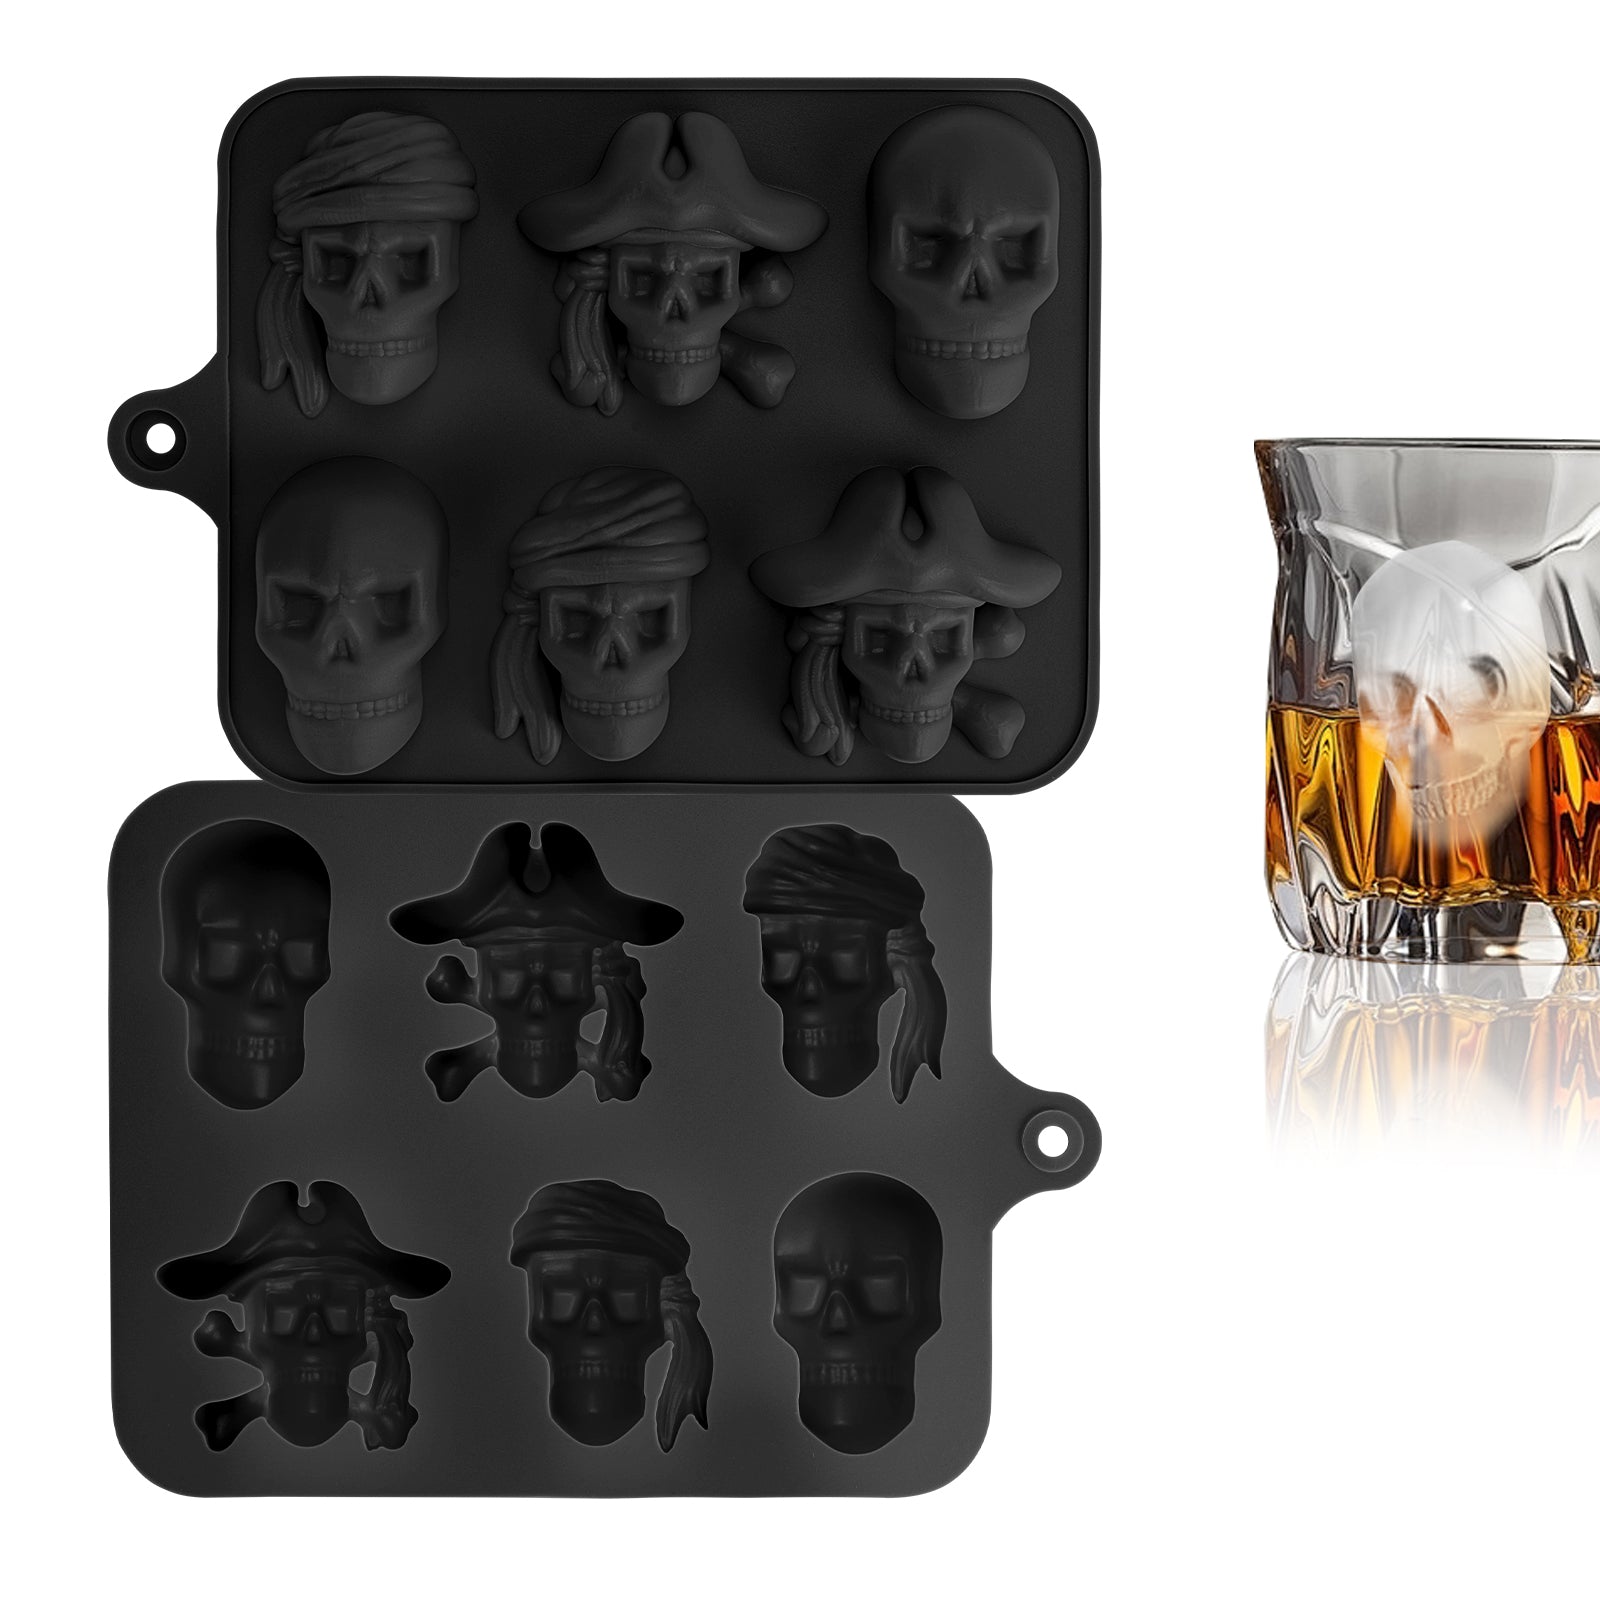 Adorila 2 Pack Pirate Skull Ice Cube Mold, Silicone Ice Cube Tray for Halloween, Reusable Ice Makers for Whiskey, Cocktails and Drinks (Black Red)